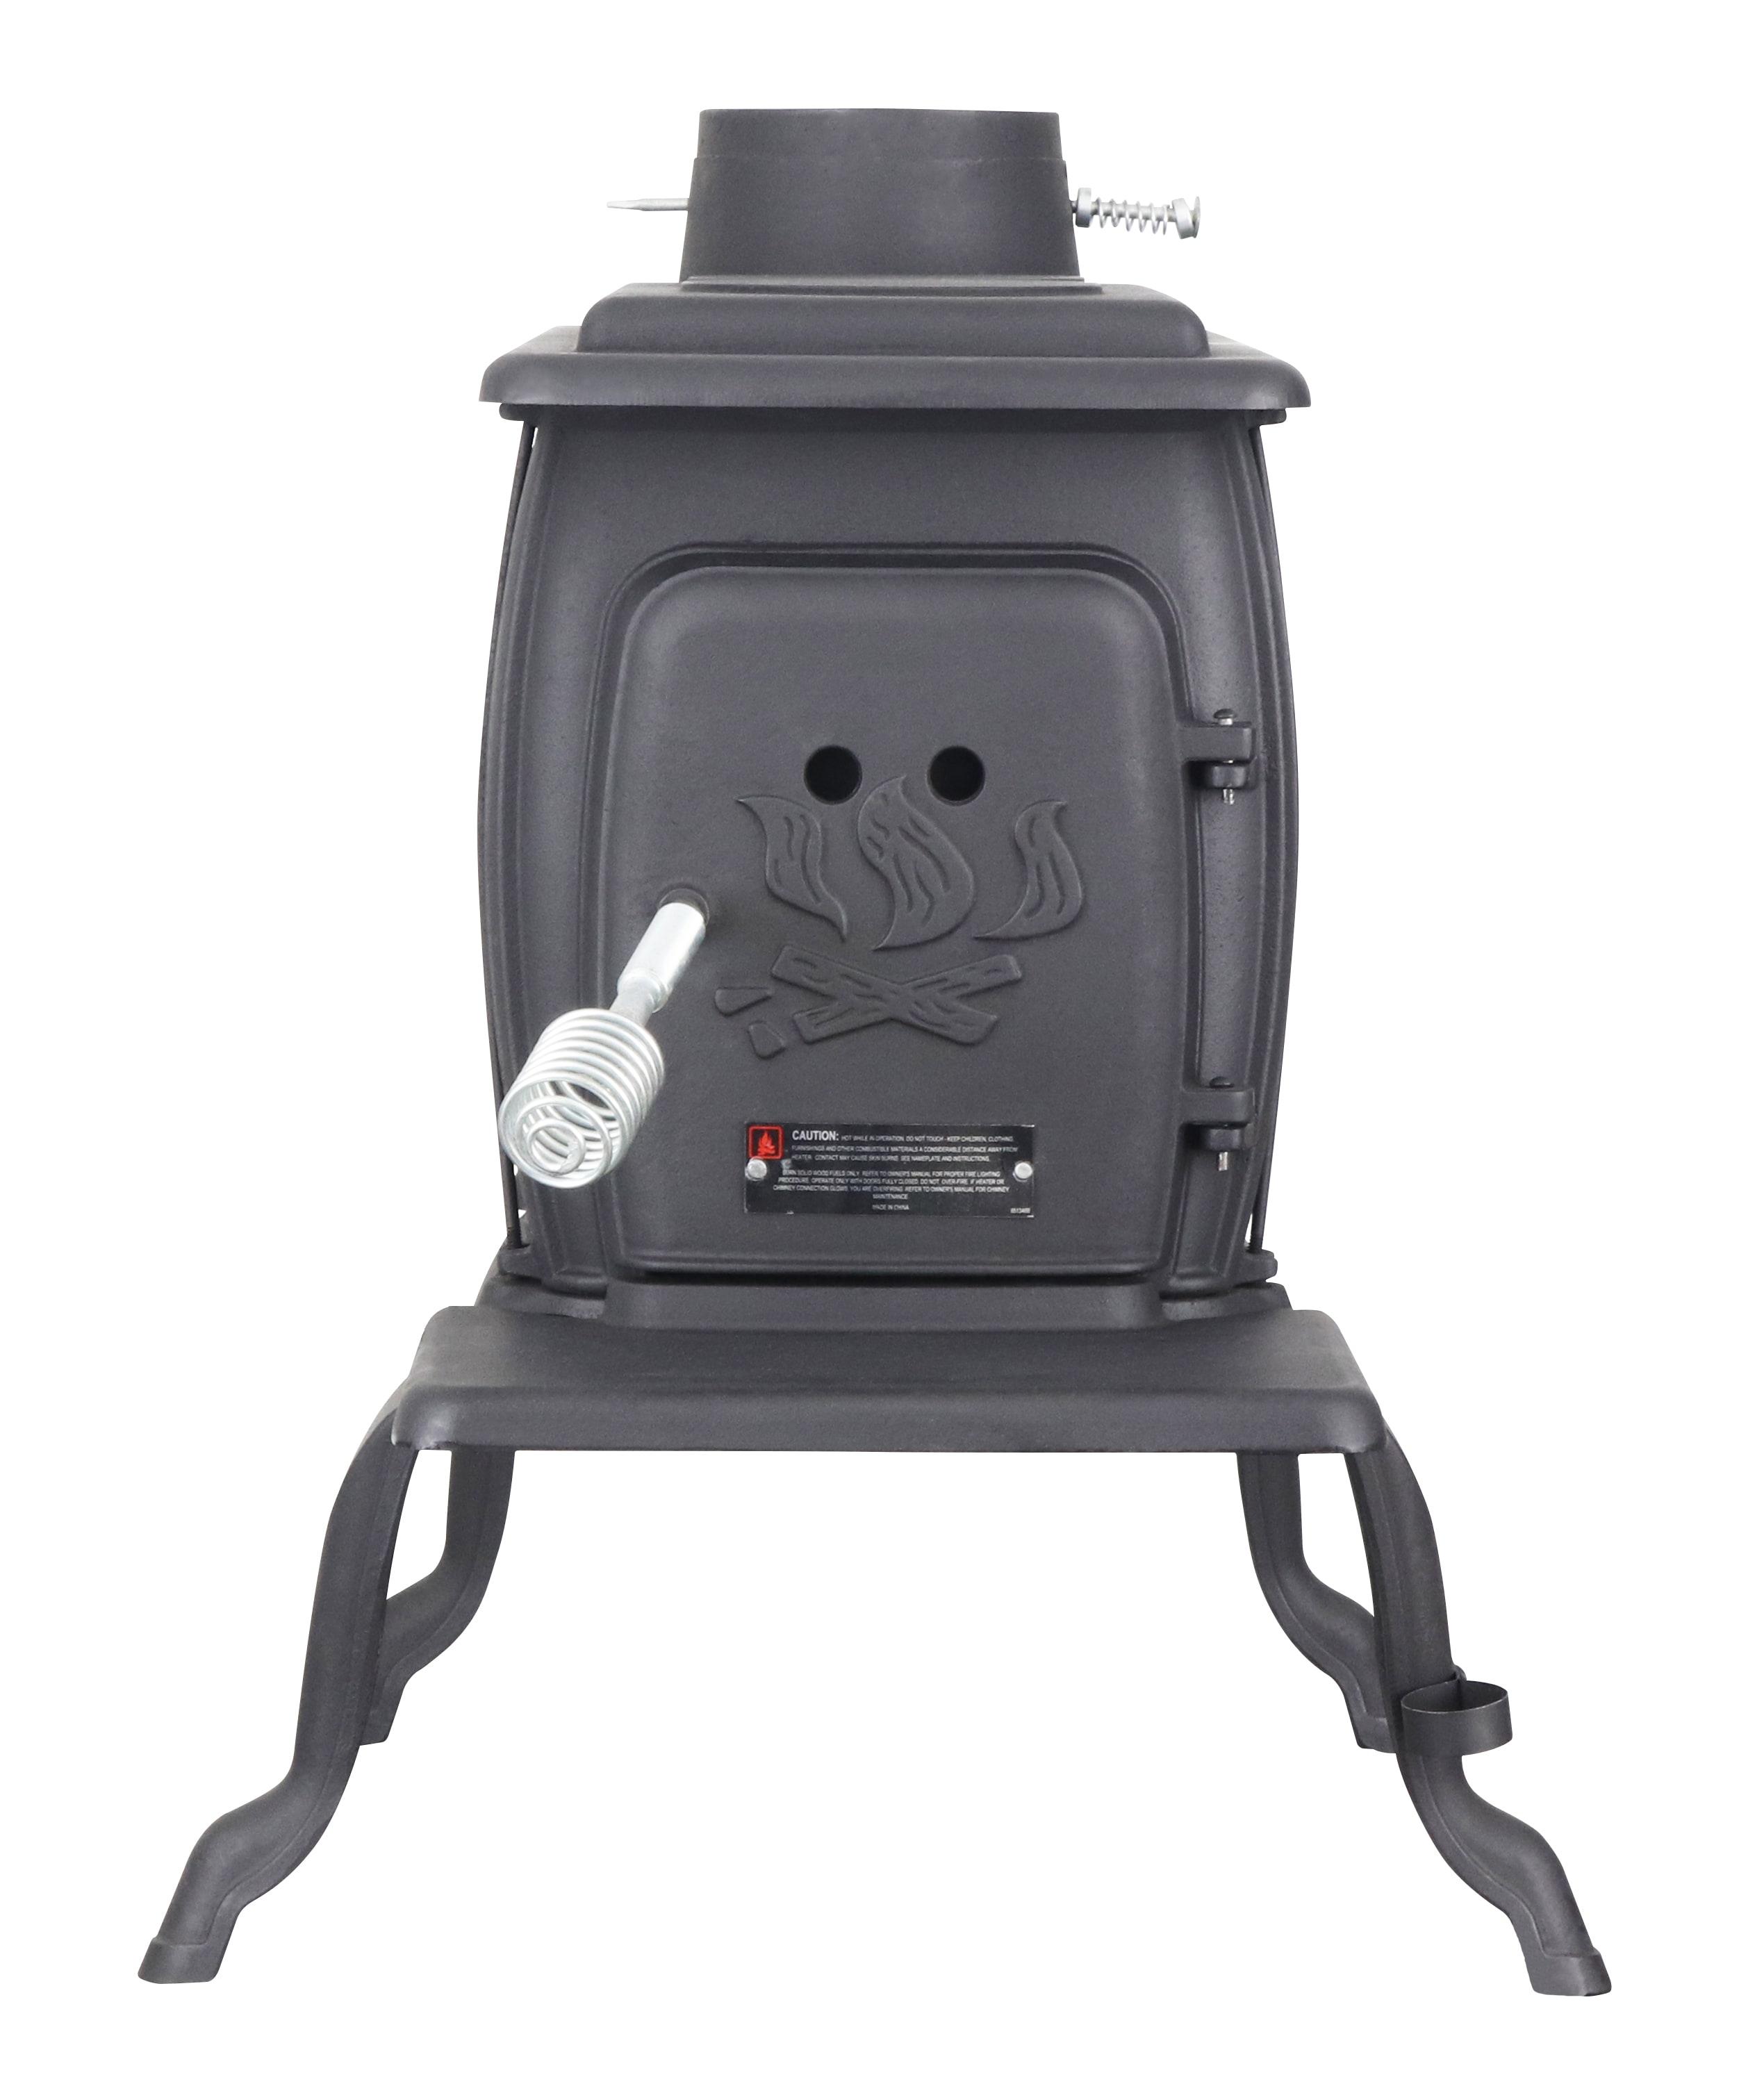 US Stove Company Black Wood Stove Heat Reclaimer - Fully Automatic Blower  Kit, Easy Installation in the Wood & Pellet Stove Accessories department at